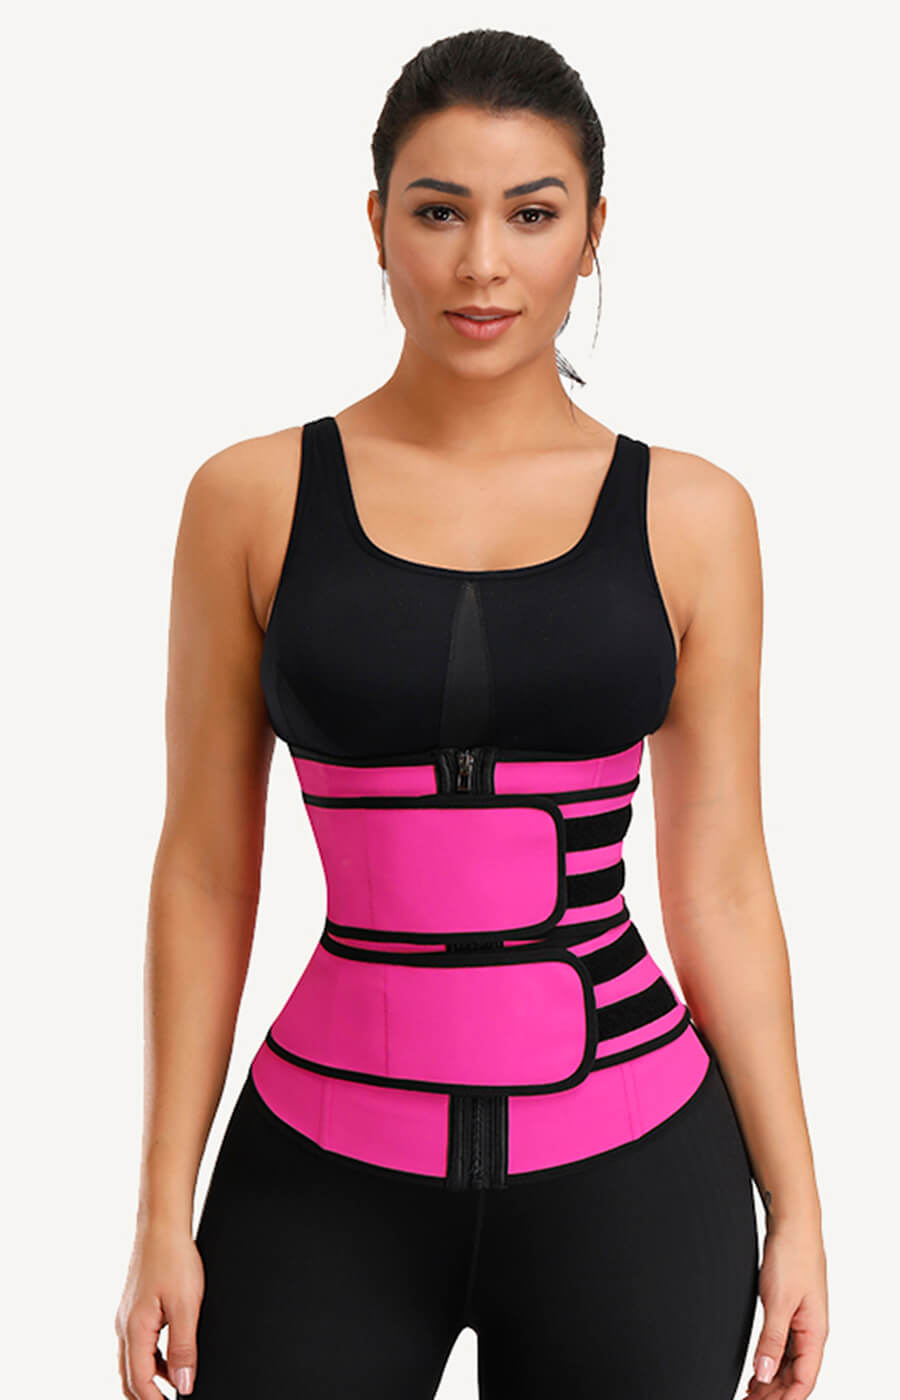 NeoSweat™ Firm Control Double Belts Waist Trainer